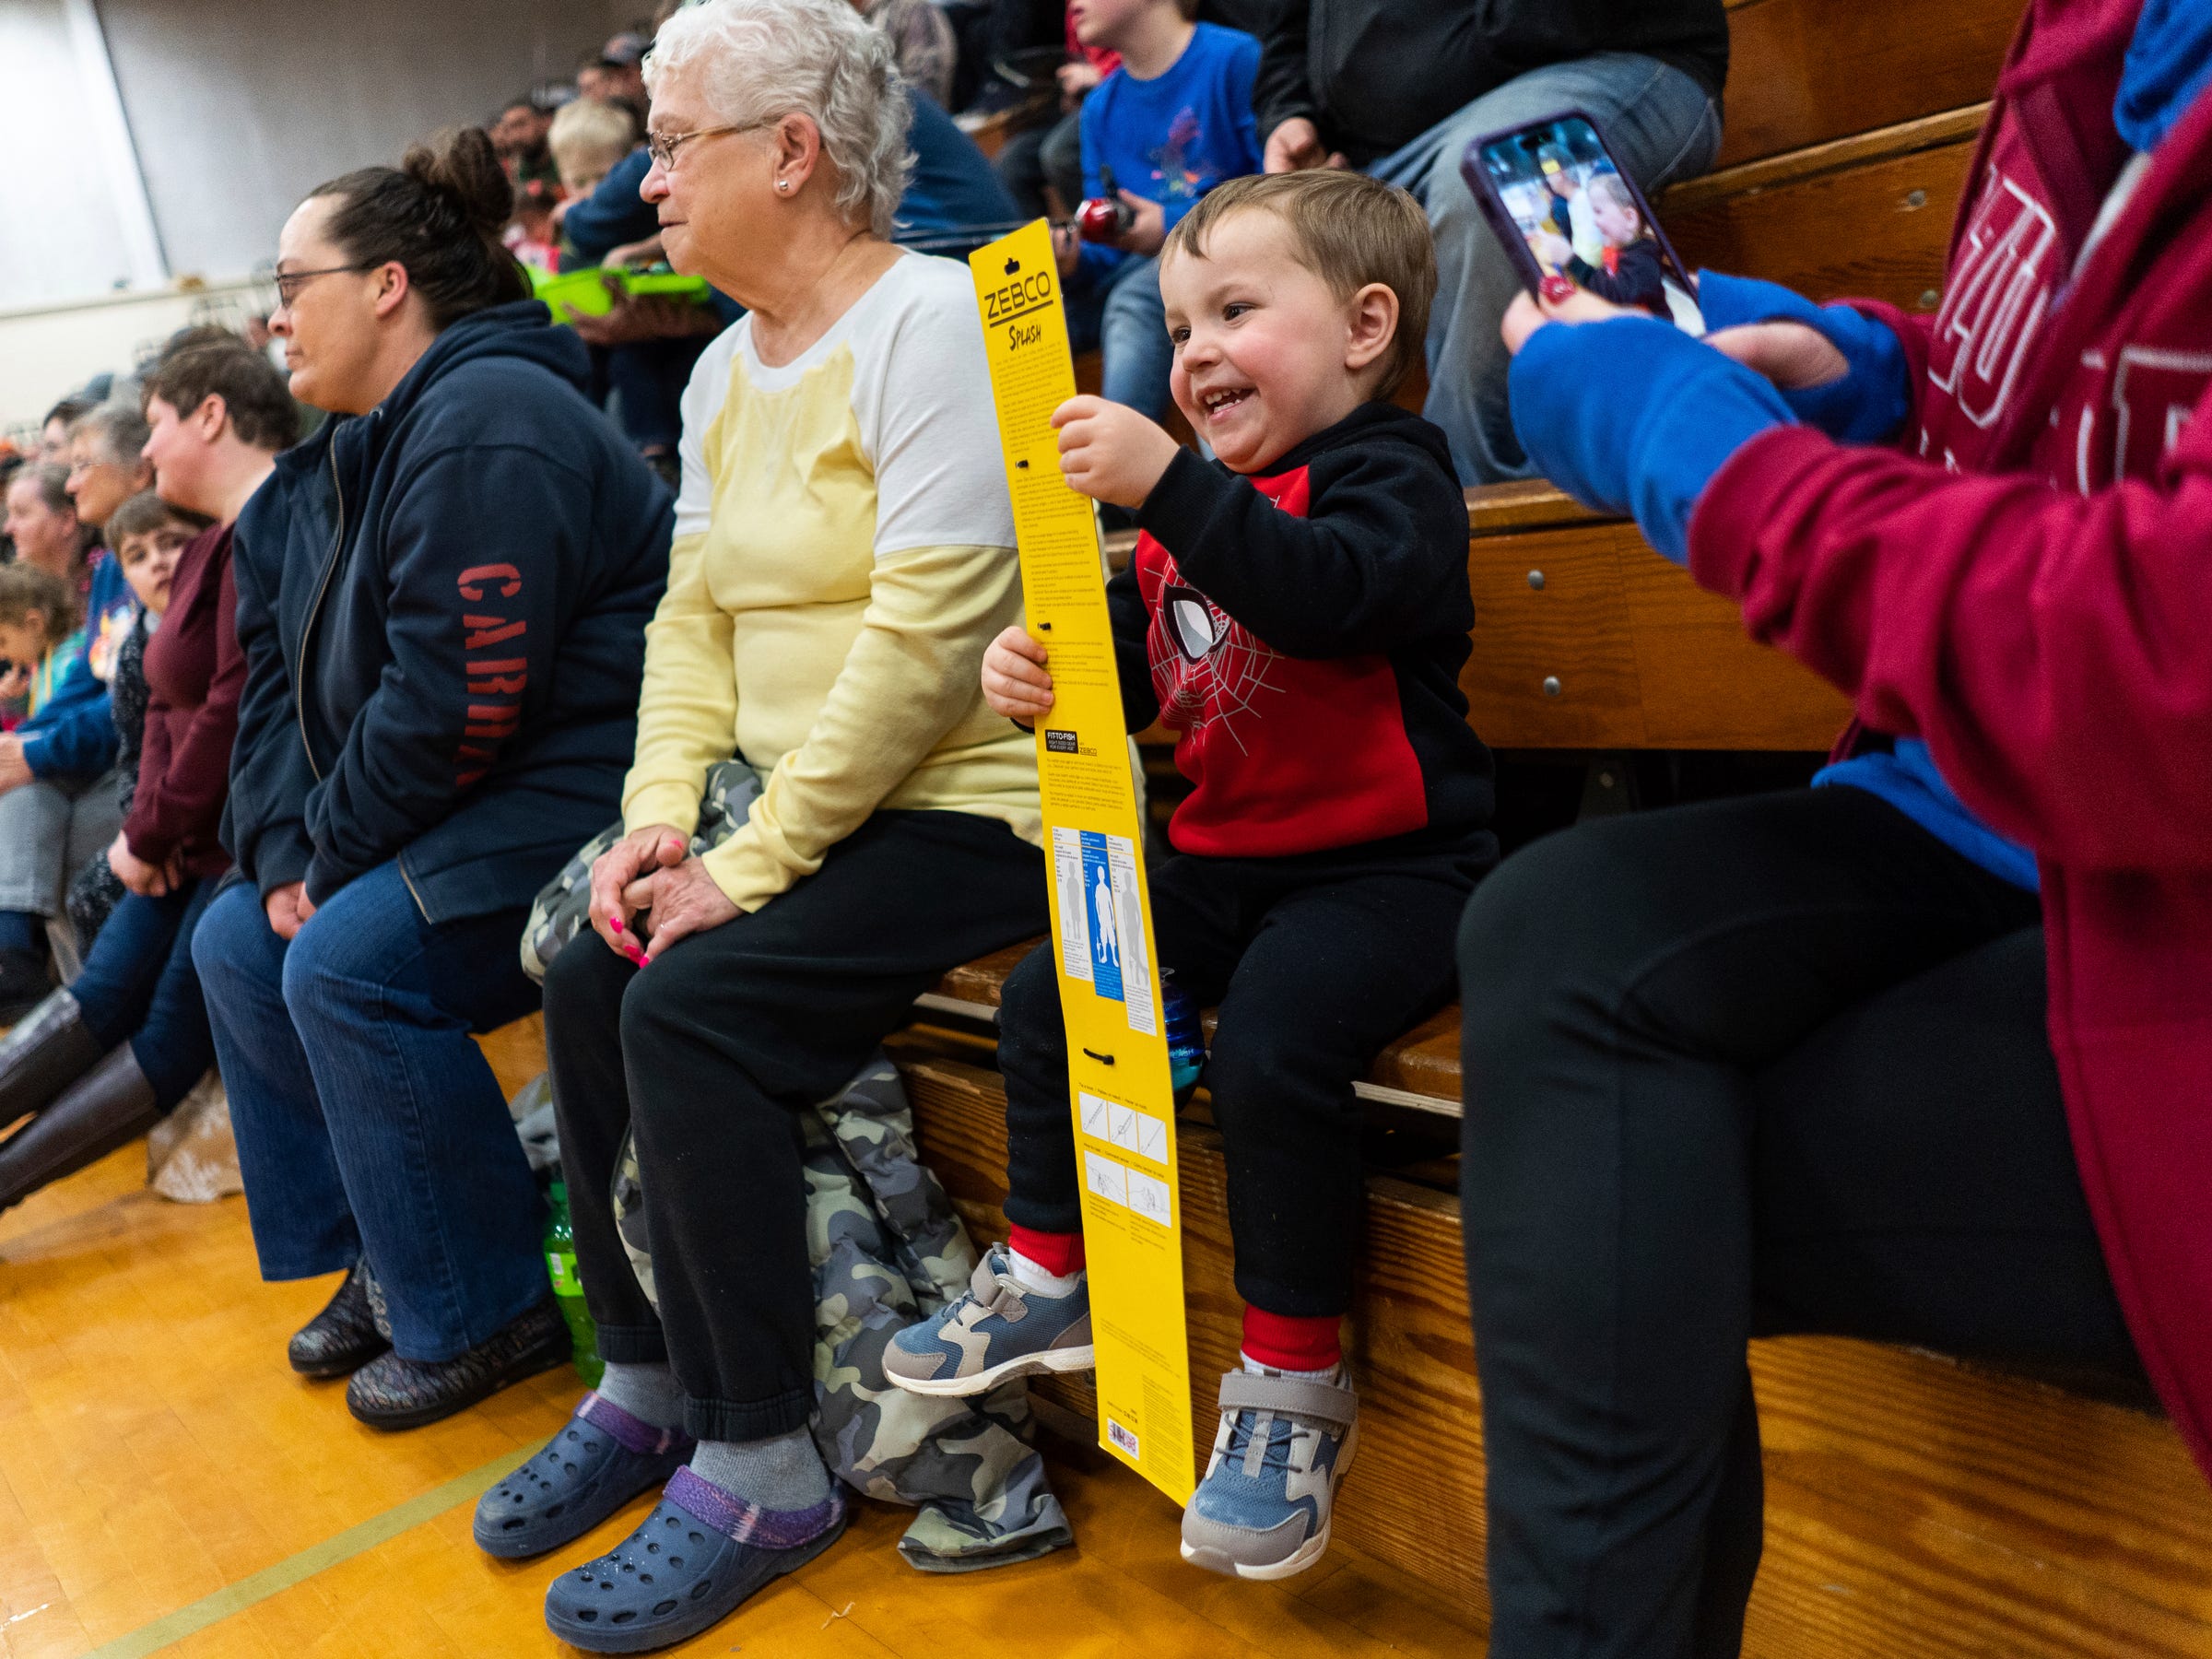 Ethen Clarke, of Gaylord, excitedly looks over a fishing pole he won during the 65th annual Kids Tackle Party held by the Tahquamenon Sportsmen's Club in Newberry on Saturday, April 22, 2023, at Newberry High School in Michigan's Upper Peninsula.